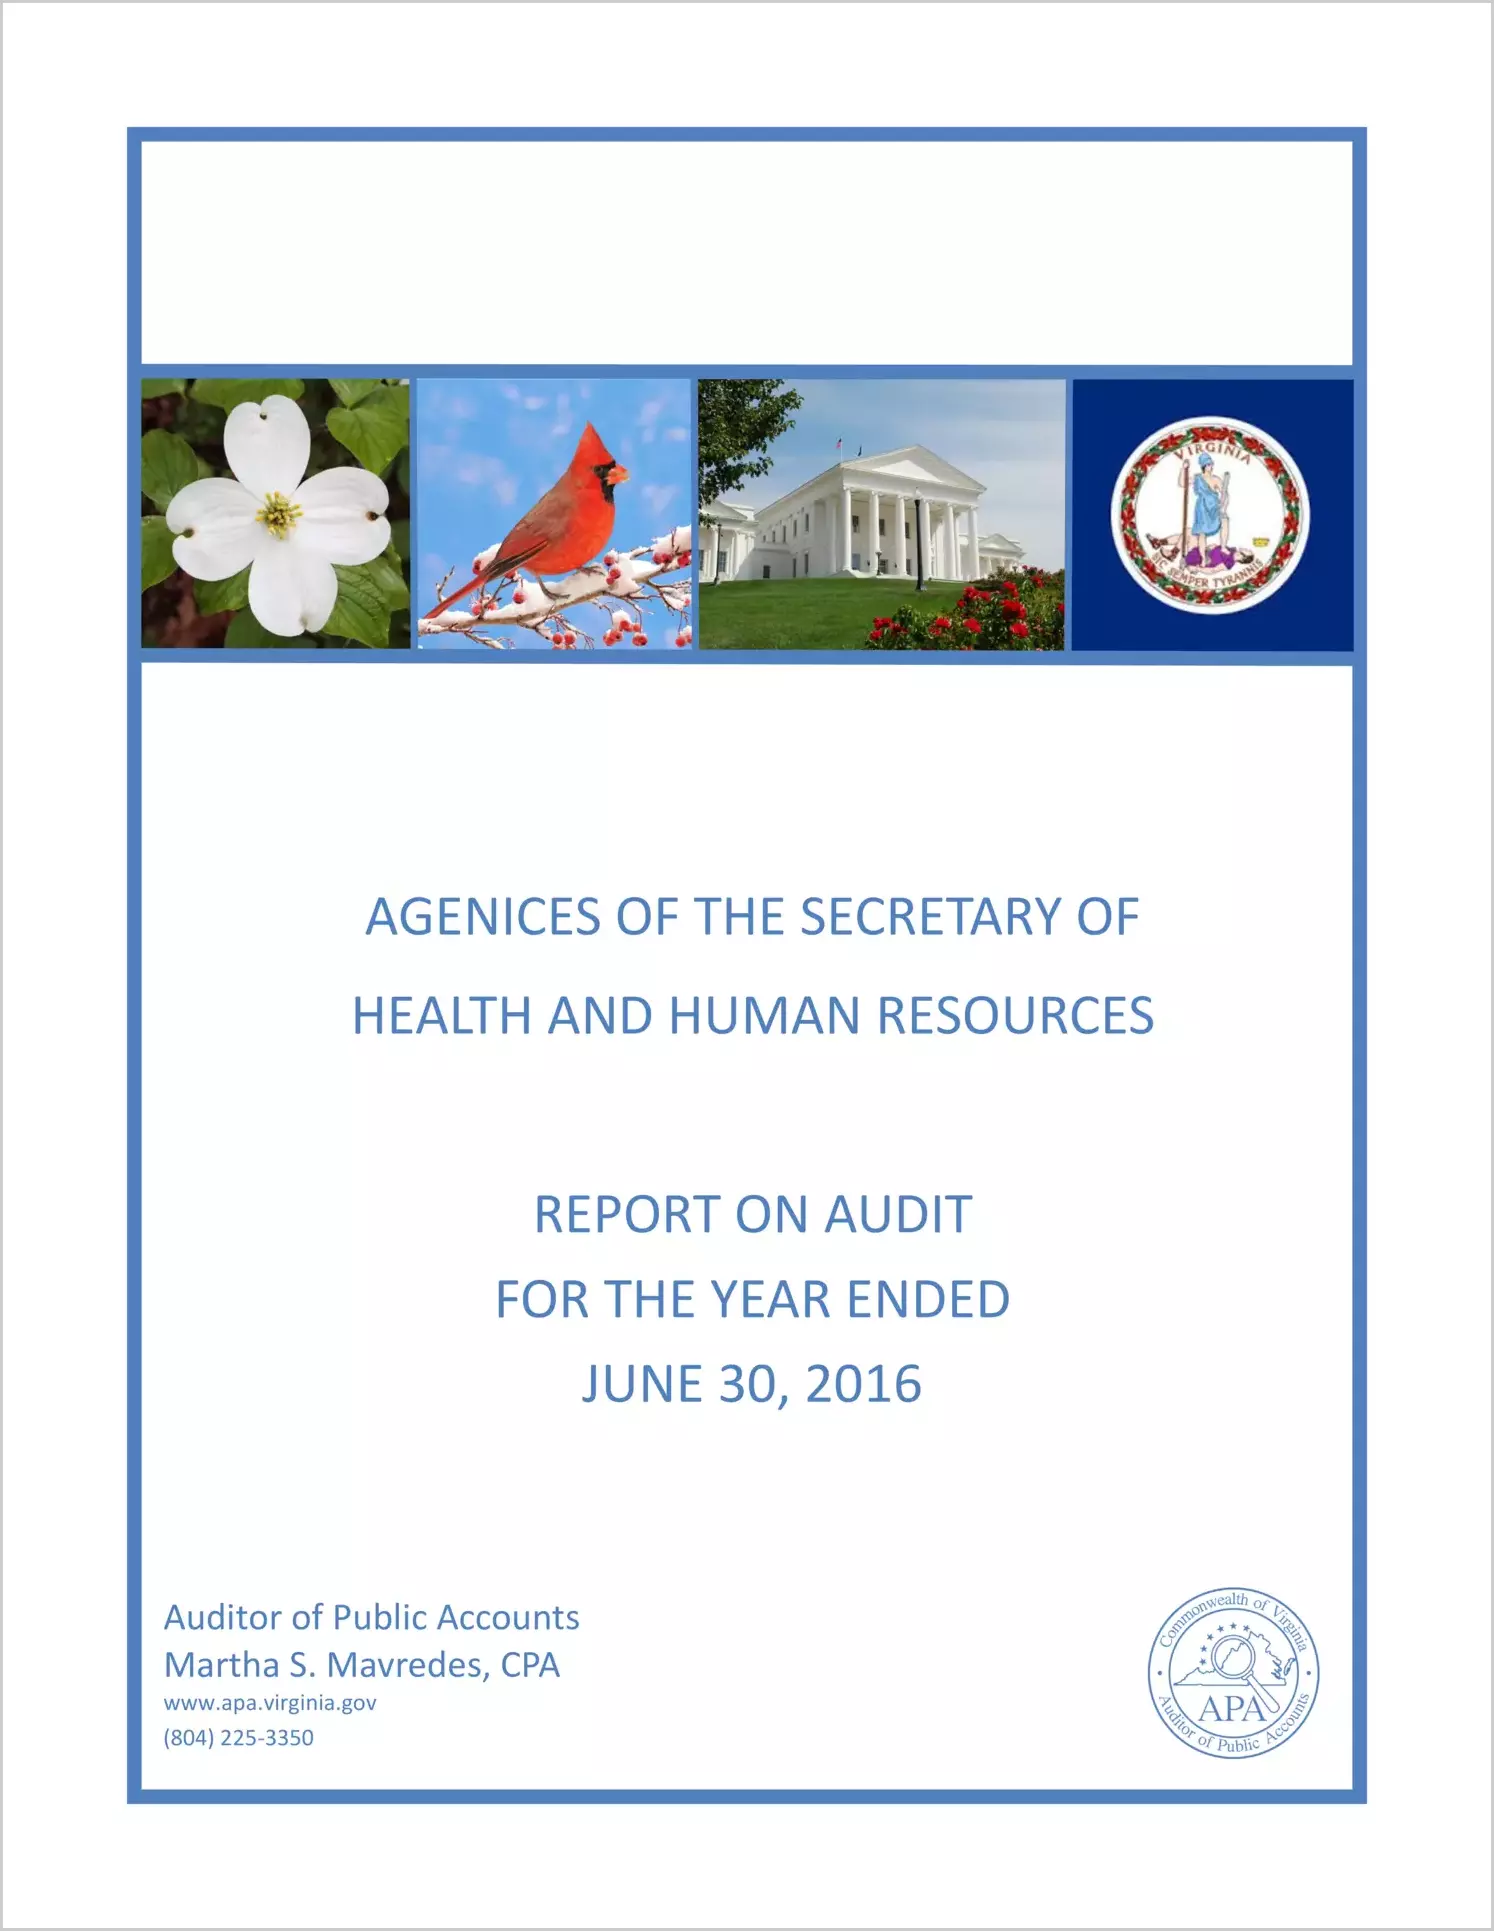 Agencies of the Secretary of Health and Human Resources for the year ended June 30, 2016